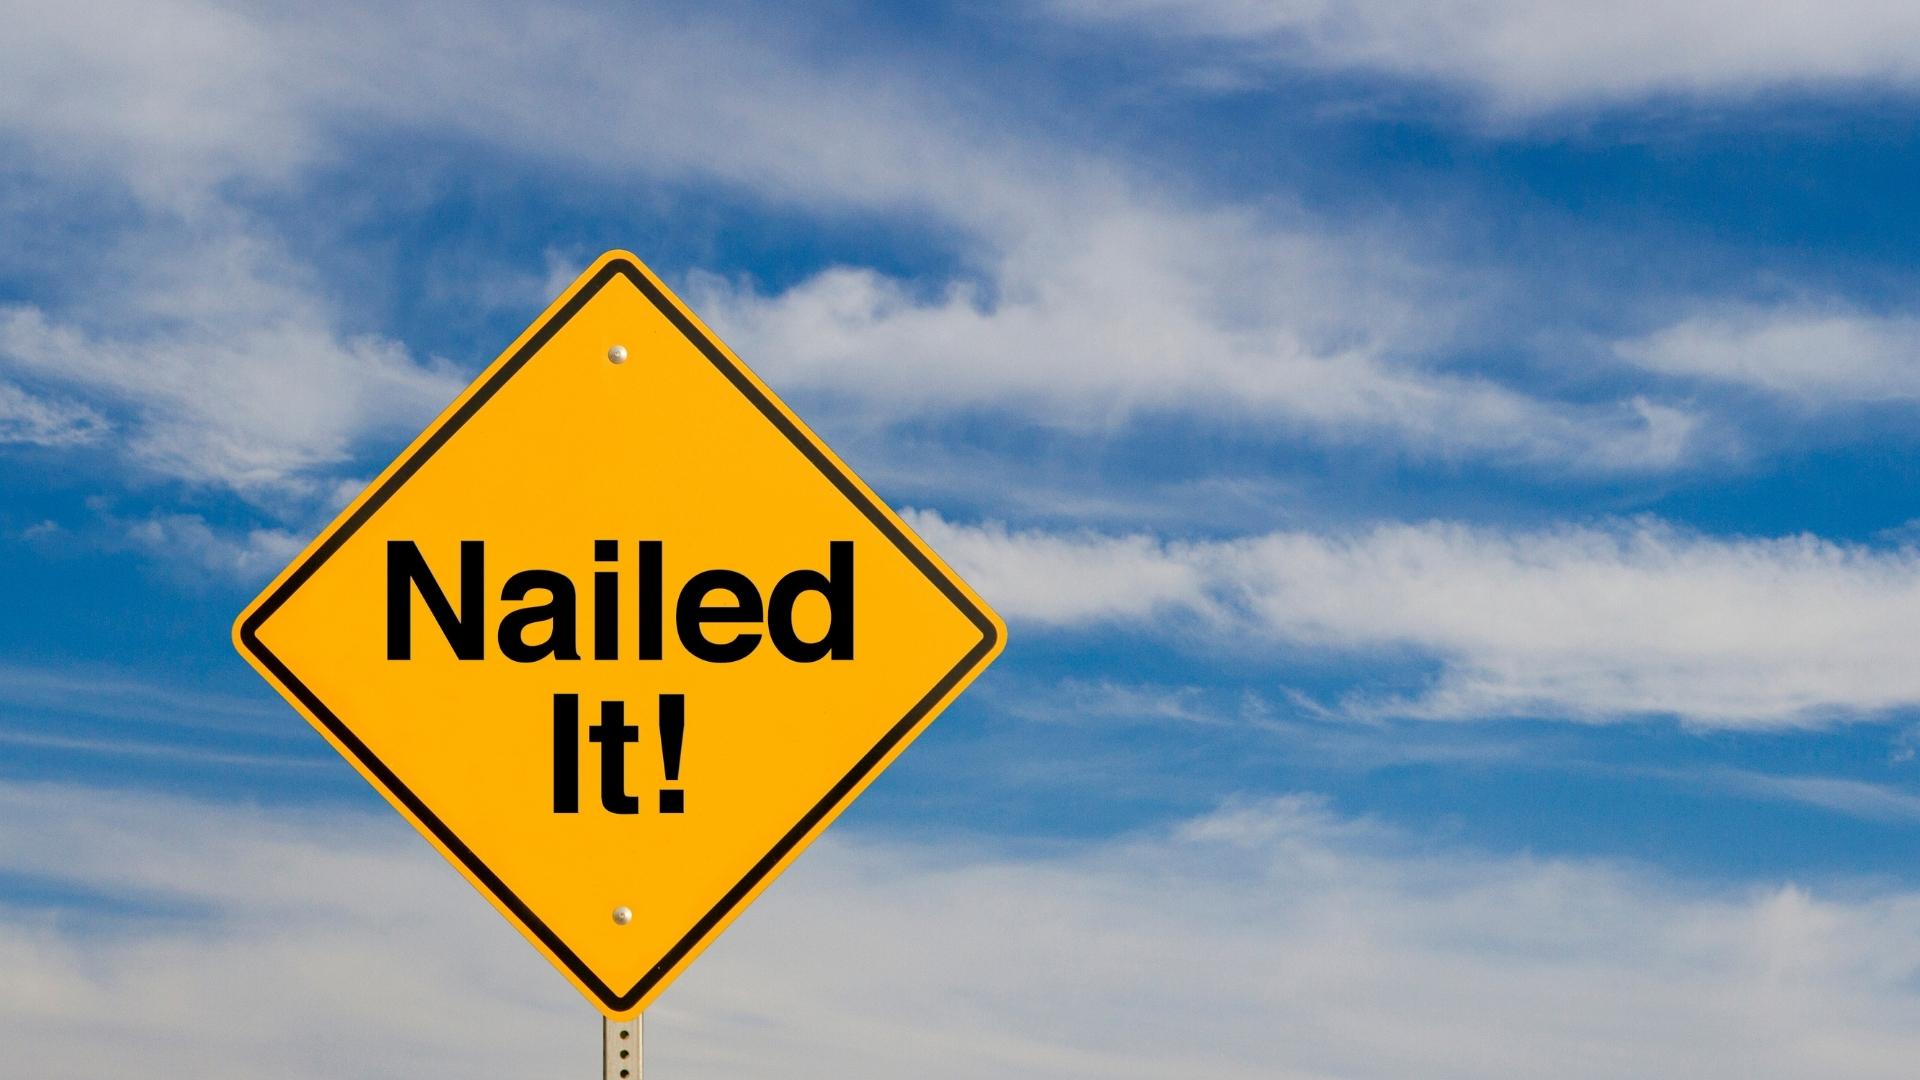 Nailed it sign with blue sky background